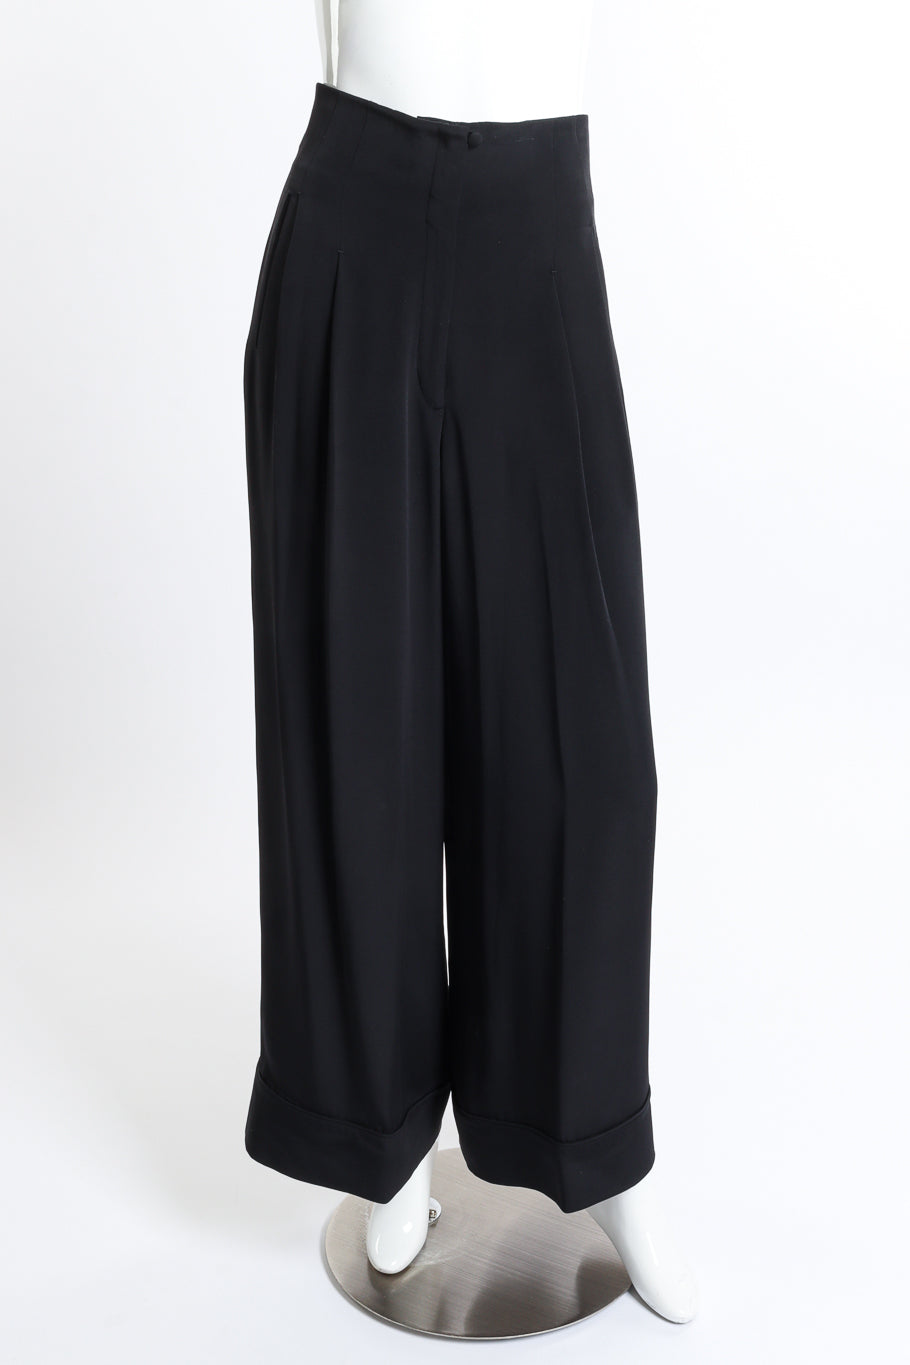 Vintage Richard Tyler wide leg high waisted black pants front view as worn on mannequin @RECESS LA